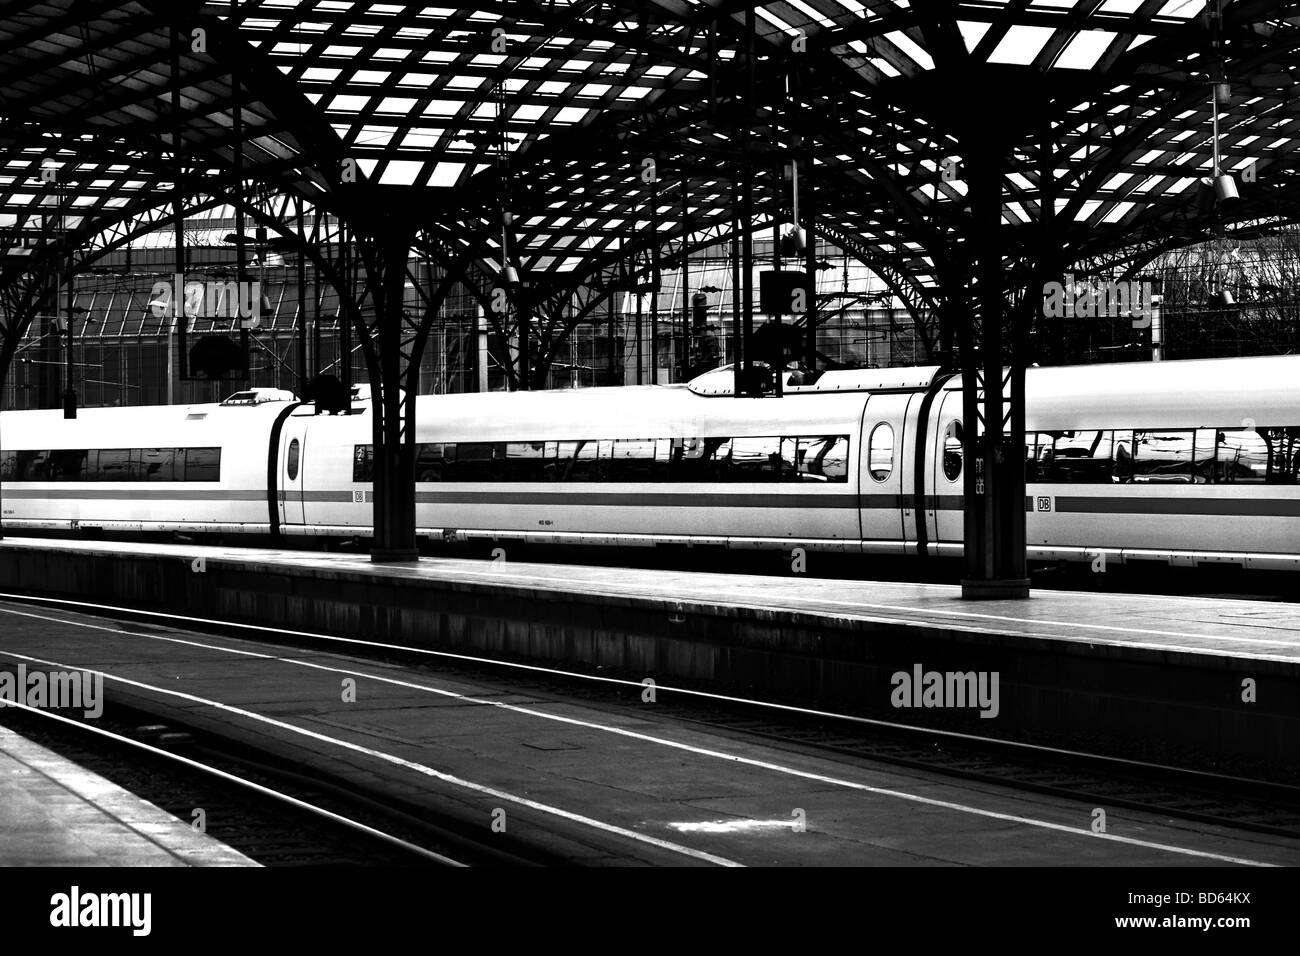 Passenger train at the railway station of Cologne Germany Stock Photo